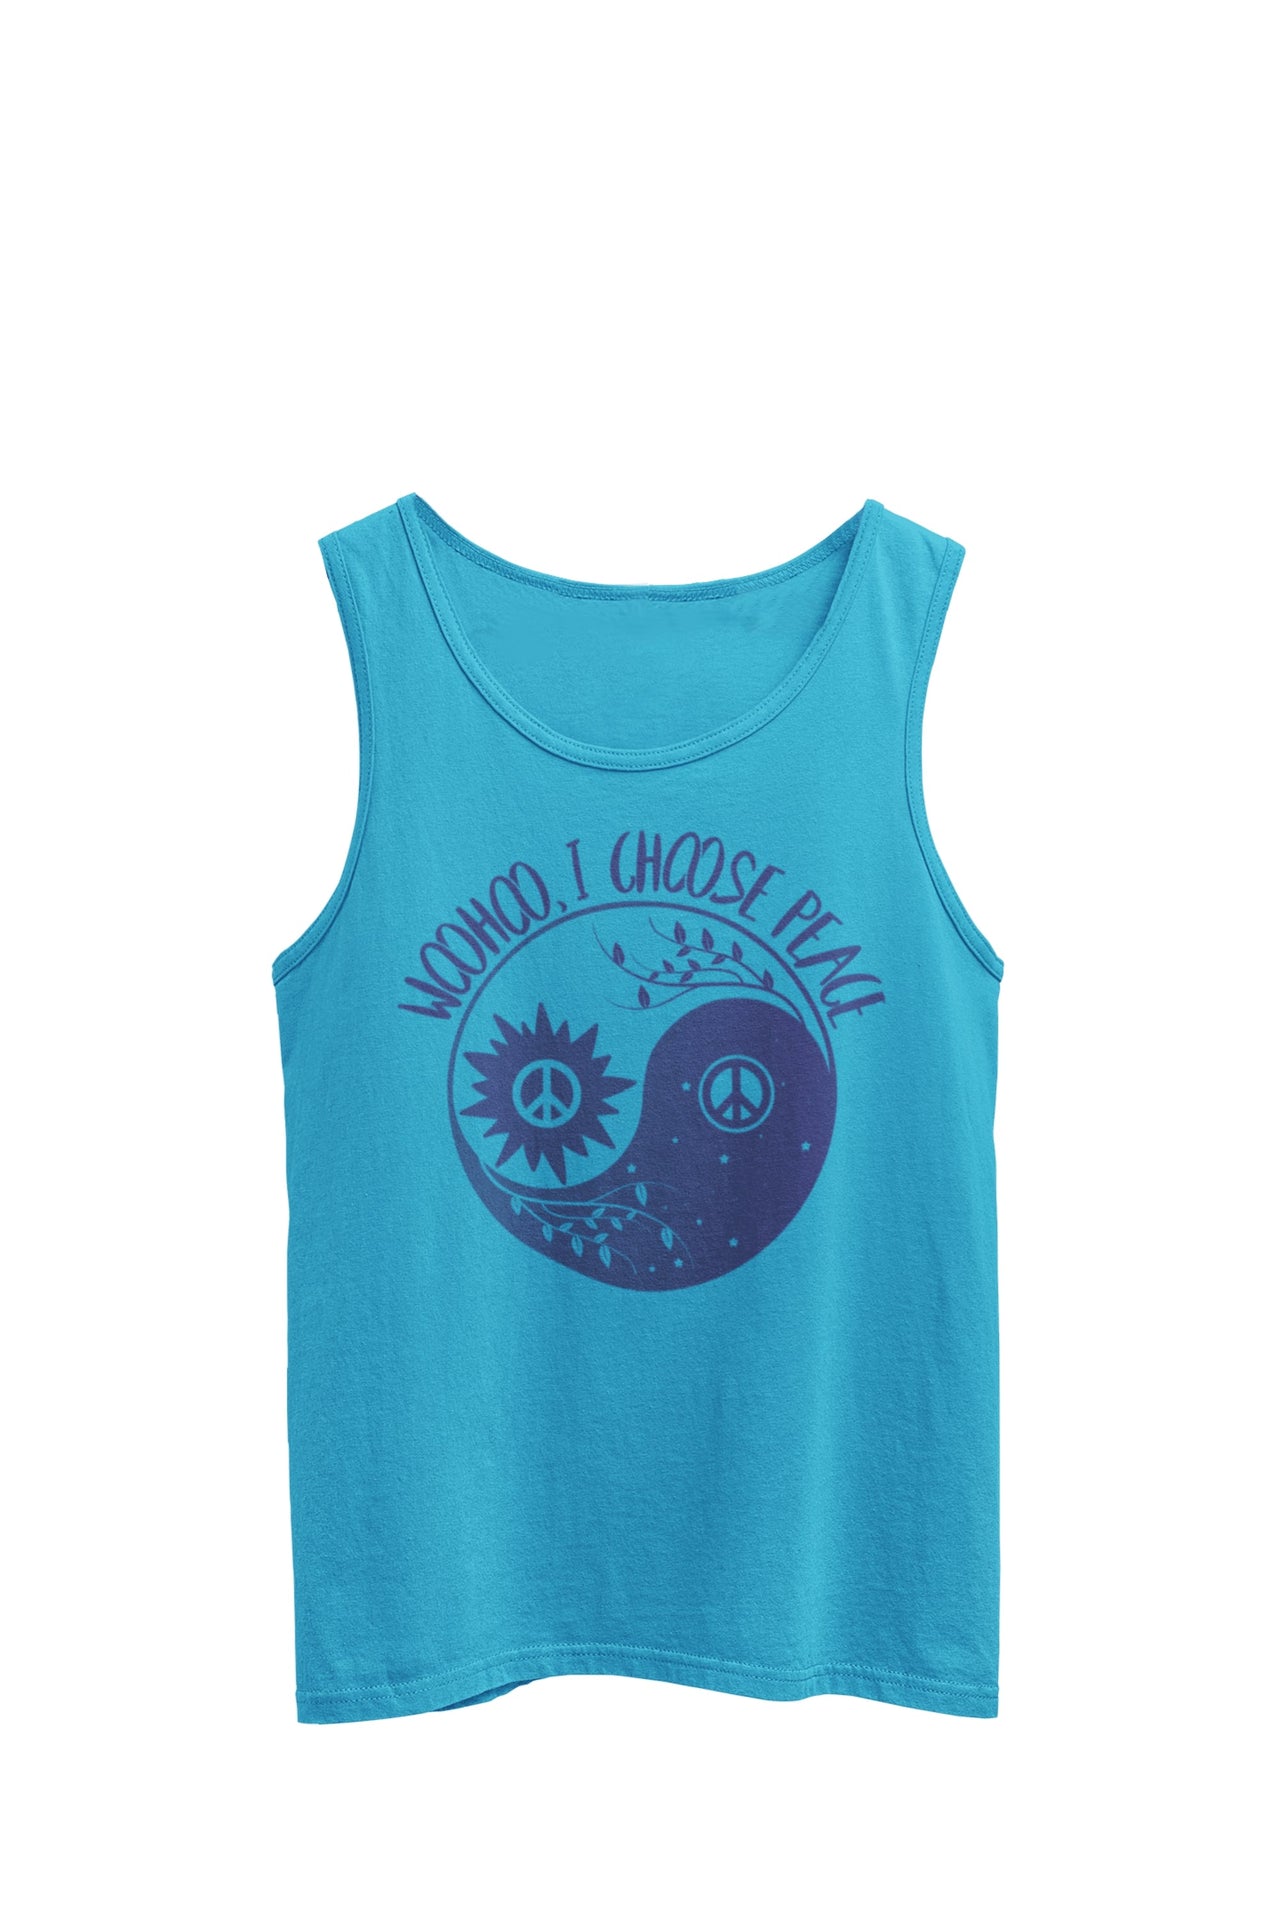 Heather light blue tank top featuring the text 'WooHoo, I Choose Peace', with a peace symbol within a Yin Yang design. Designed by WooHoo Apparel.